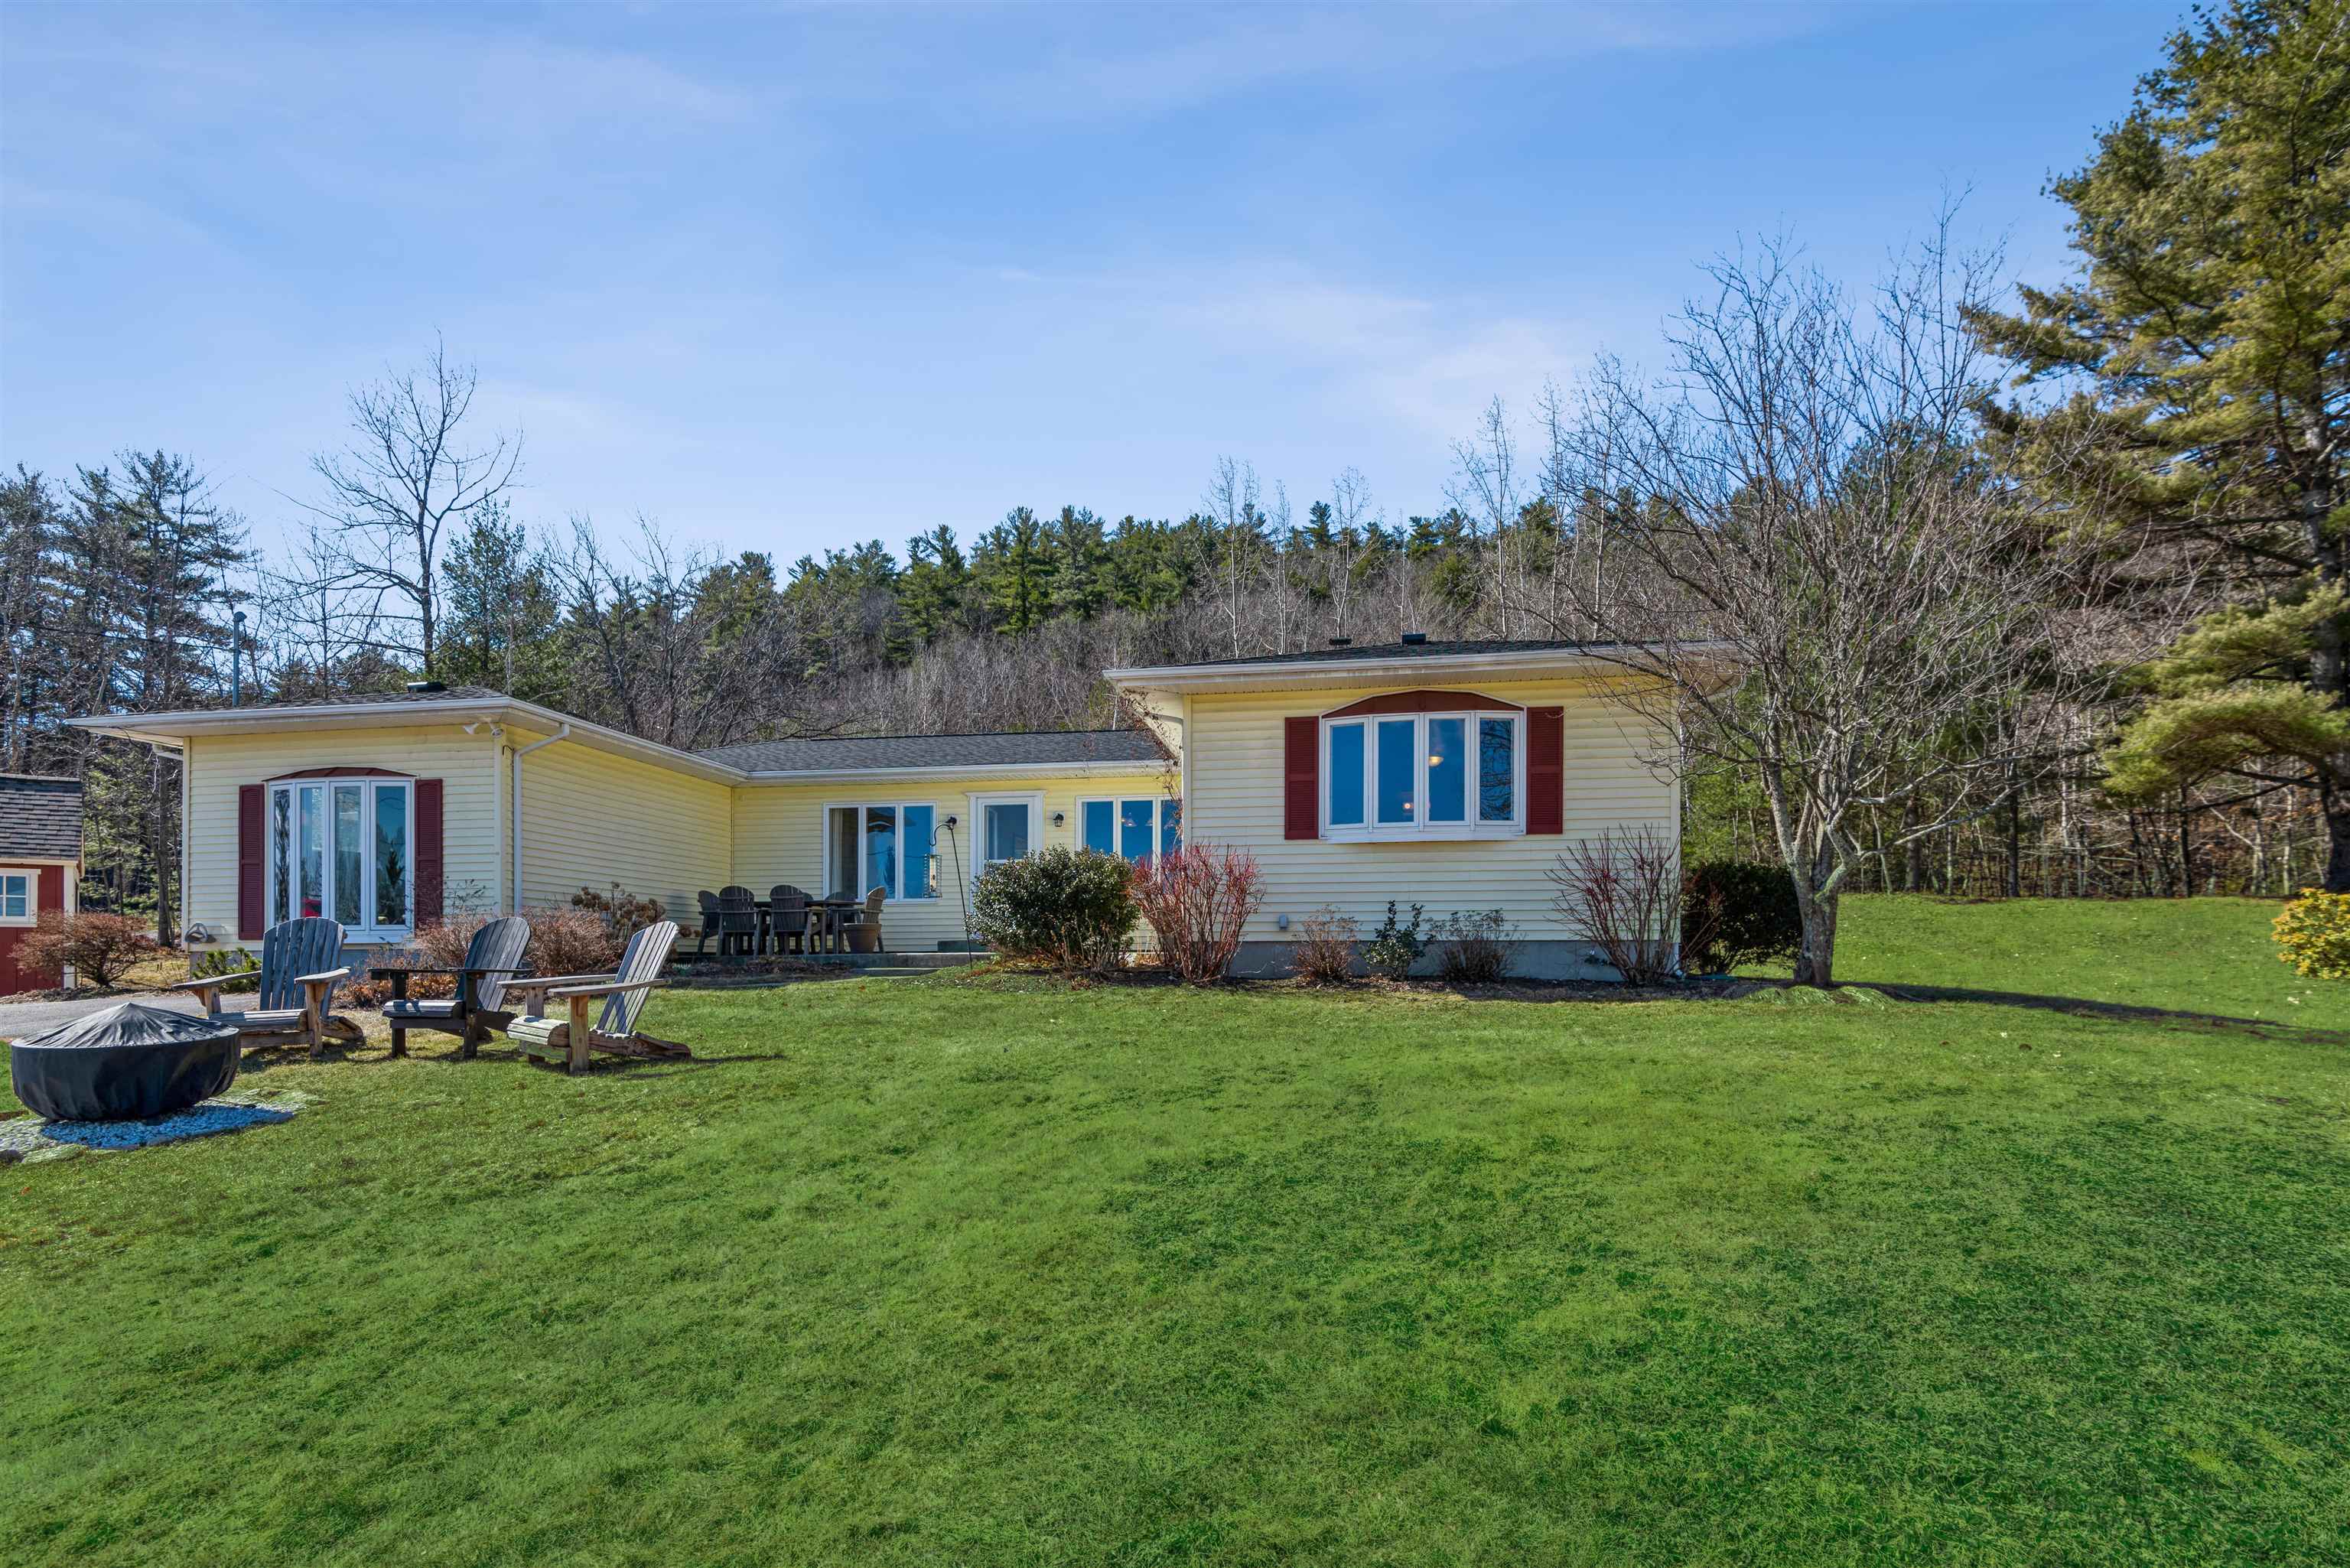 GILFORD NH Home for sale $$799,000 | $461 per sq.ft.